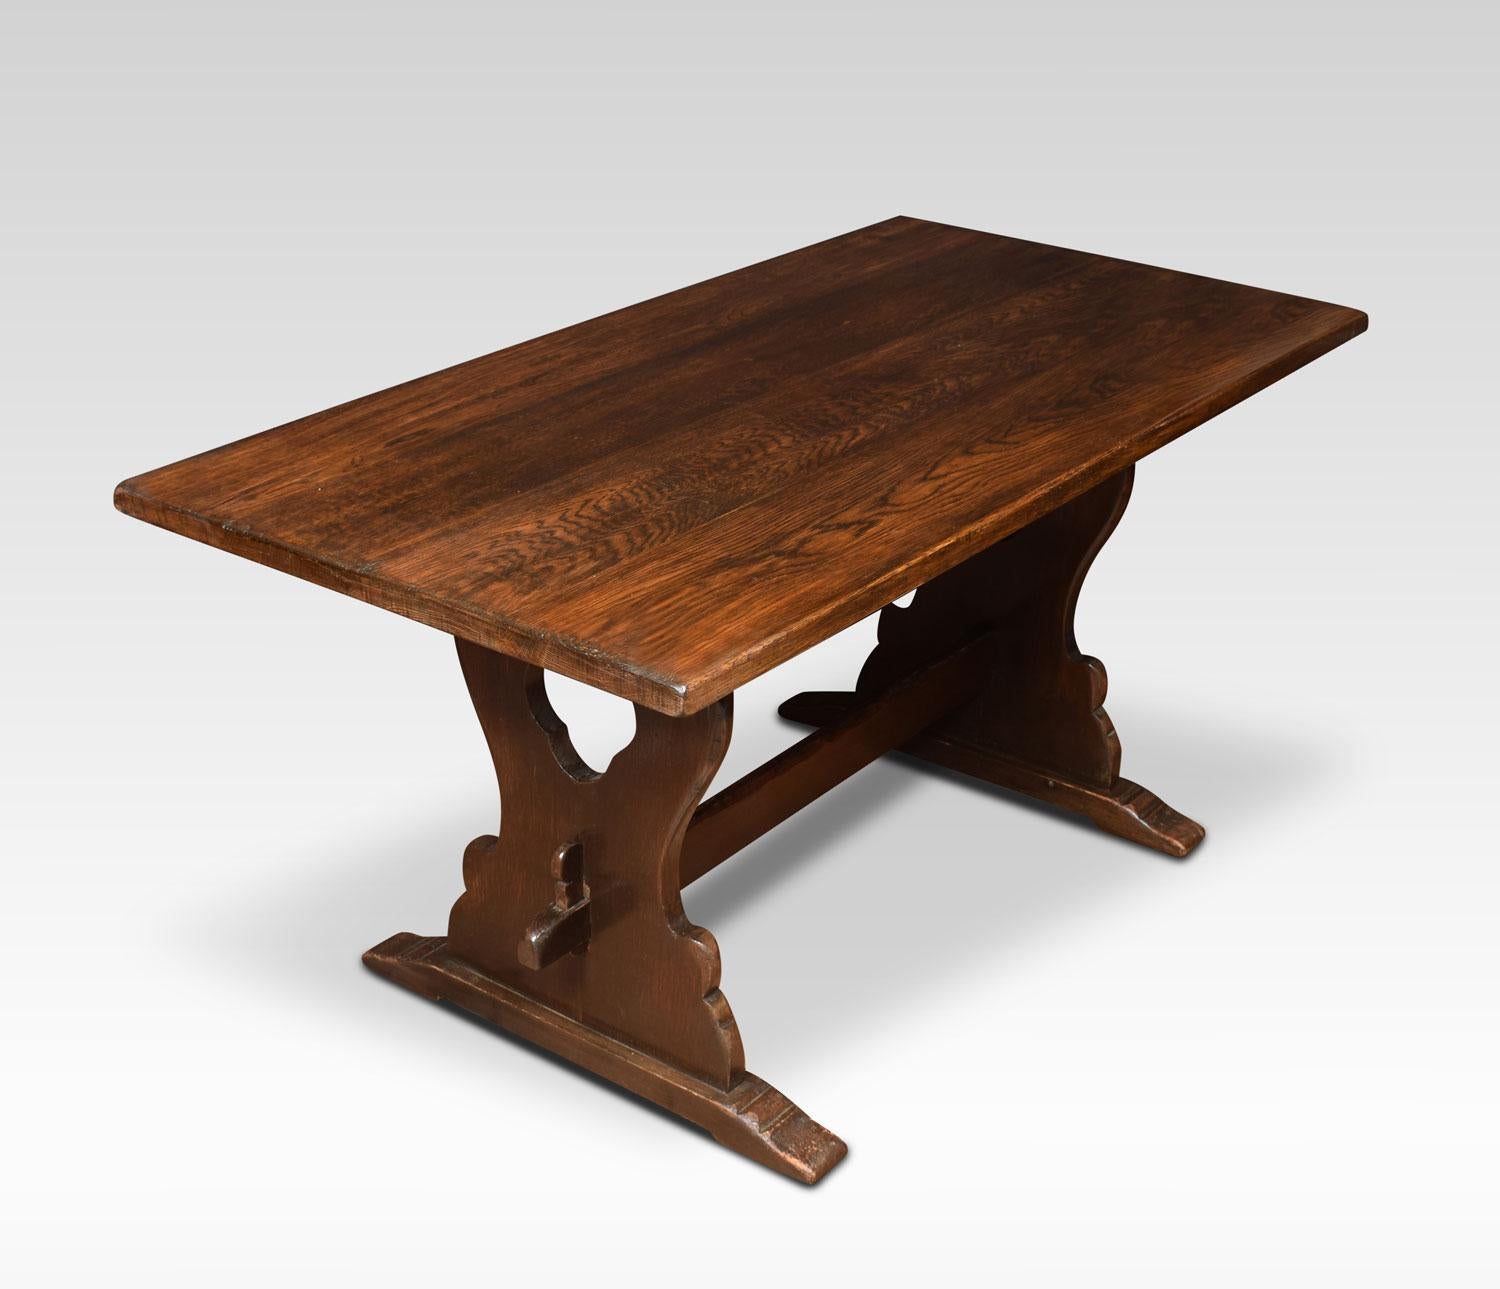 Oak refectory table, the plank top with rounded corners, raised on arched supports with trestle legs.
Dimensions
Height 27.5 Inches
Width 60 Inches
Depth 30.5 Inches